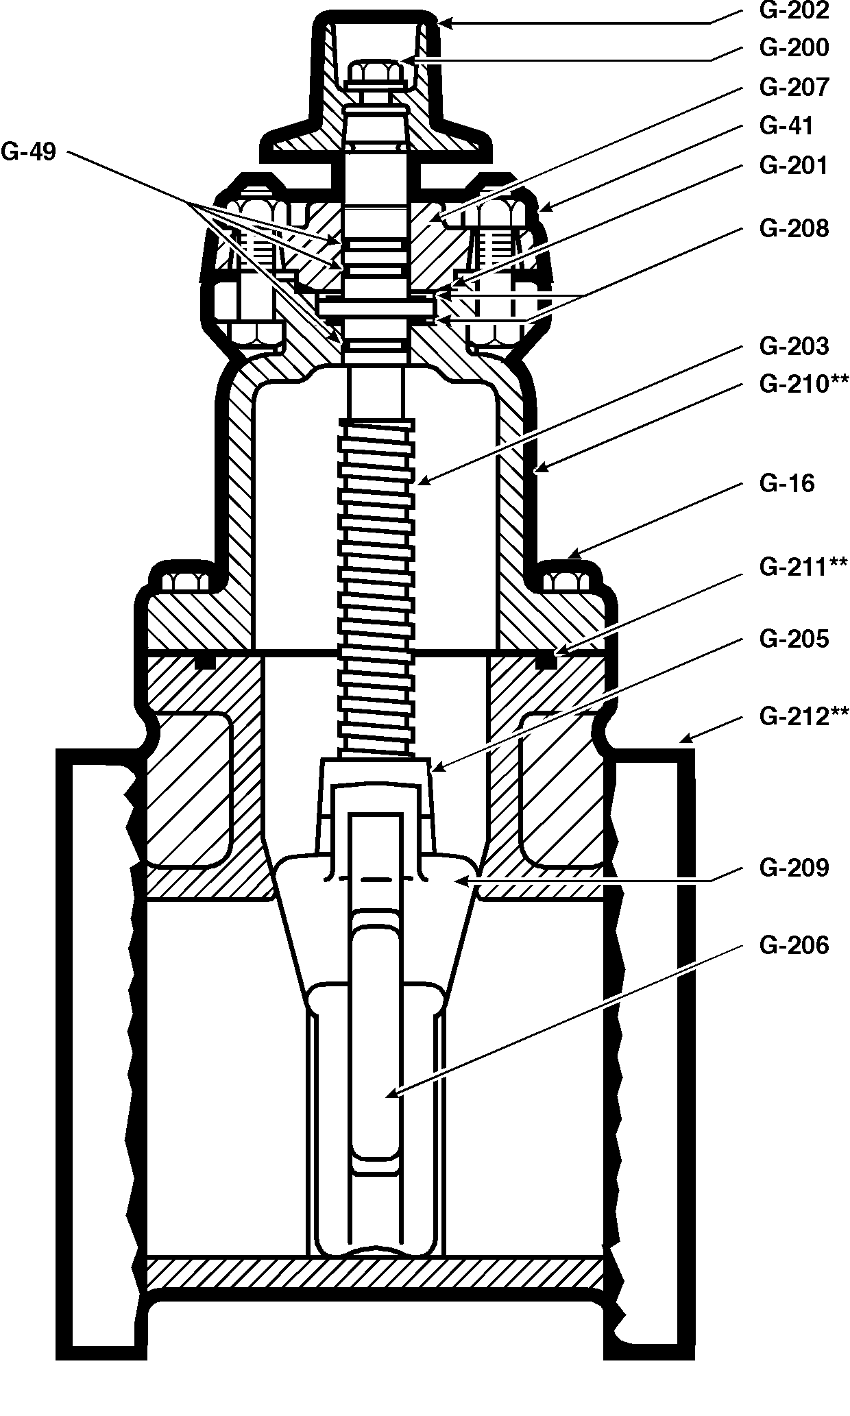 T-USP1 Tapping Valve MJ FL Parts Drawing